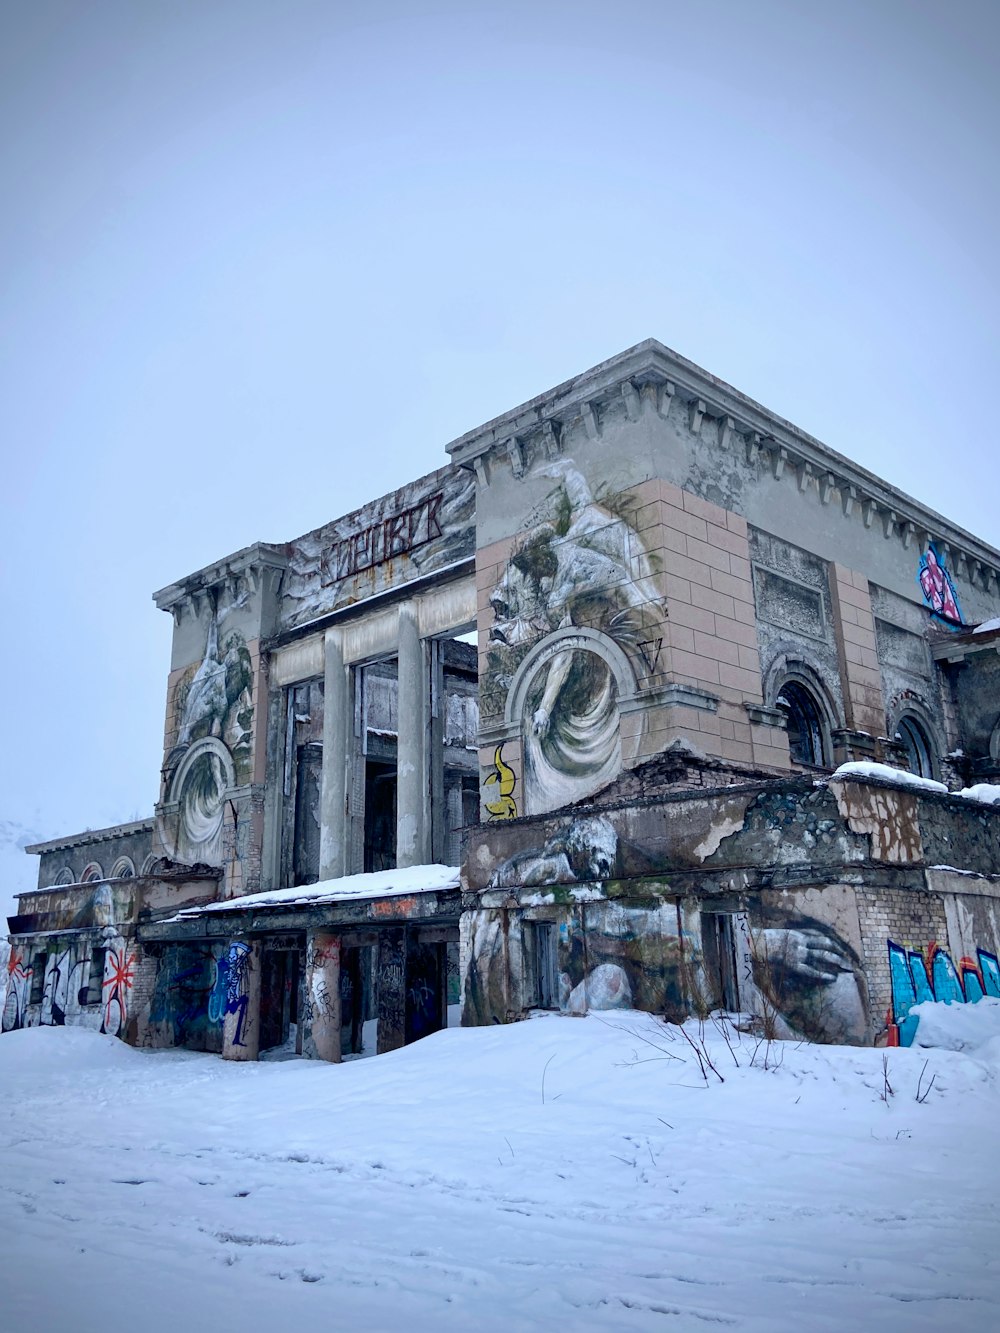 an old building with a lot of graffiti on it